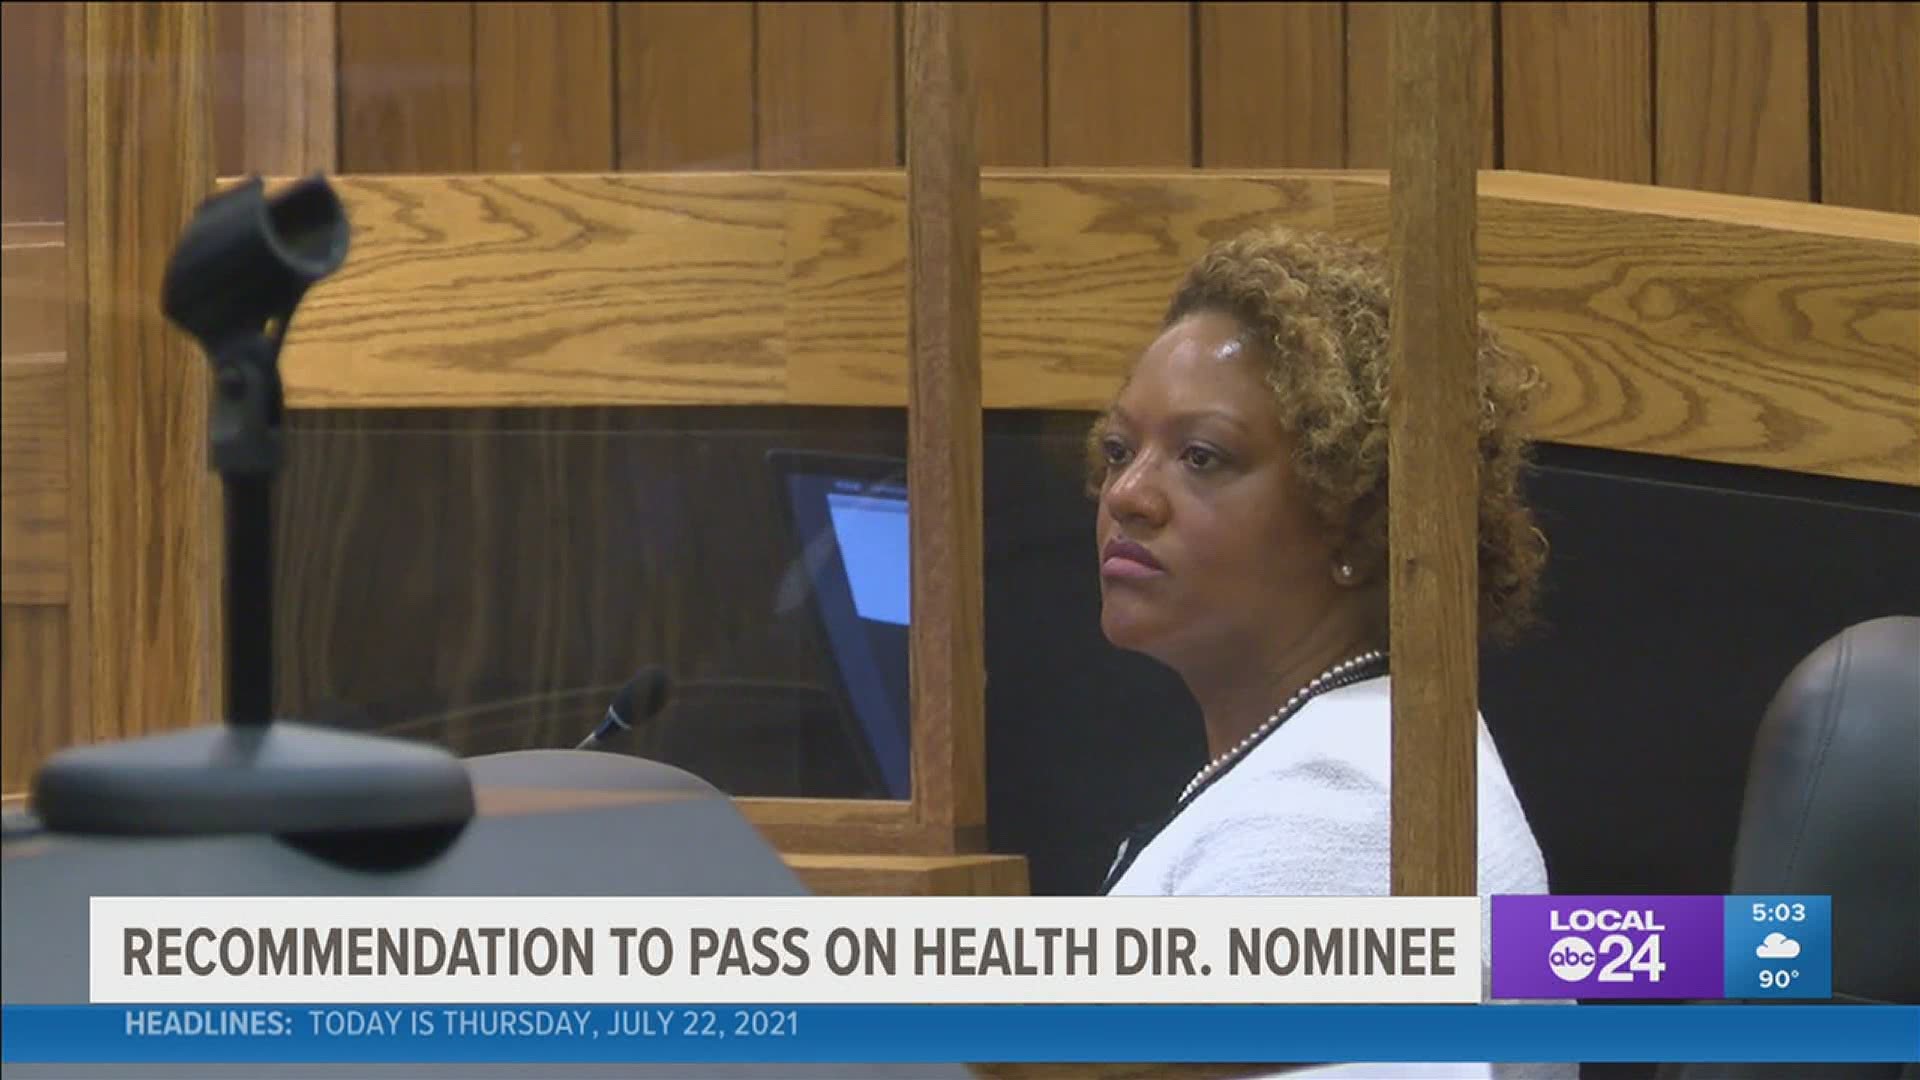 In a statement Thursday, Dr. Lasonya Hall said the sentences were taken out of a larger report, and there was significant vetting by the mayor & state health dept.